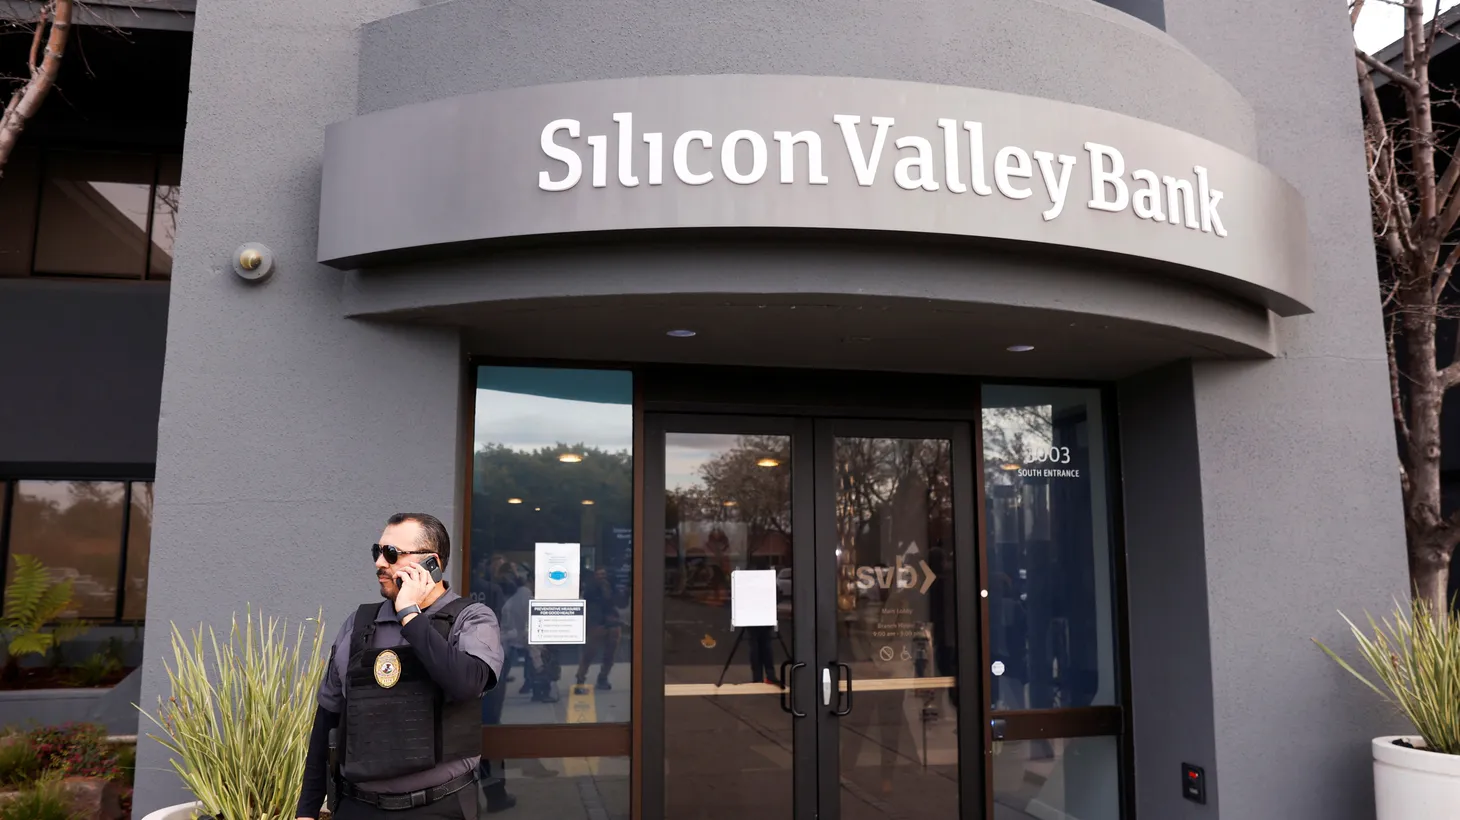 A security guard stands outside of the entrance of the Silicon Valley Bank headquarters in Santa Clara, California, U.S., March 13, 2023.